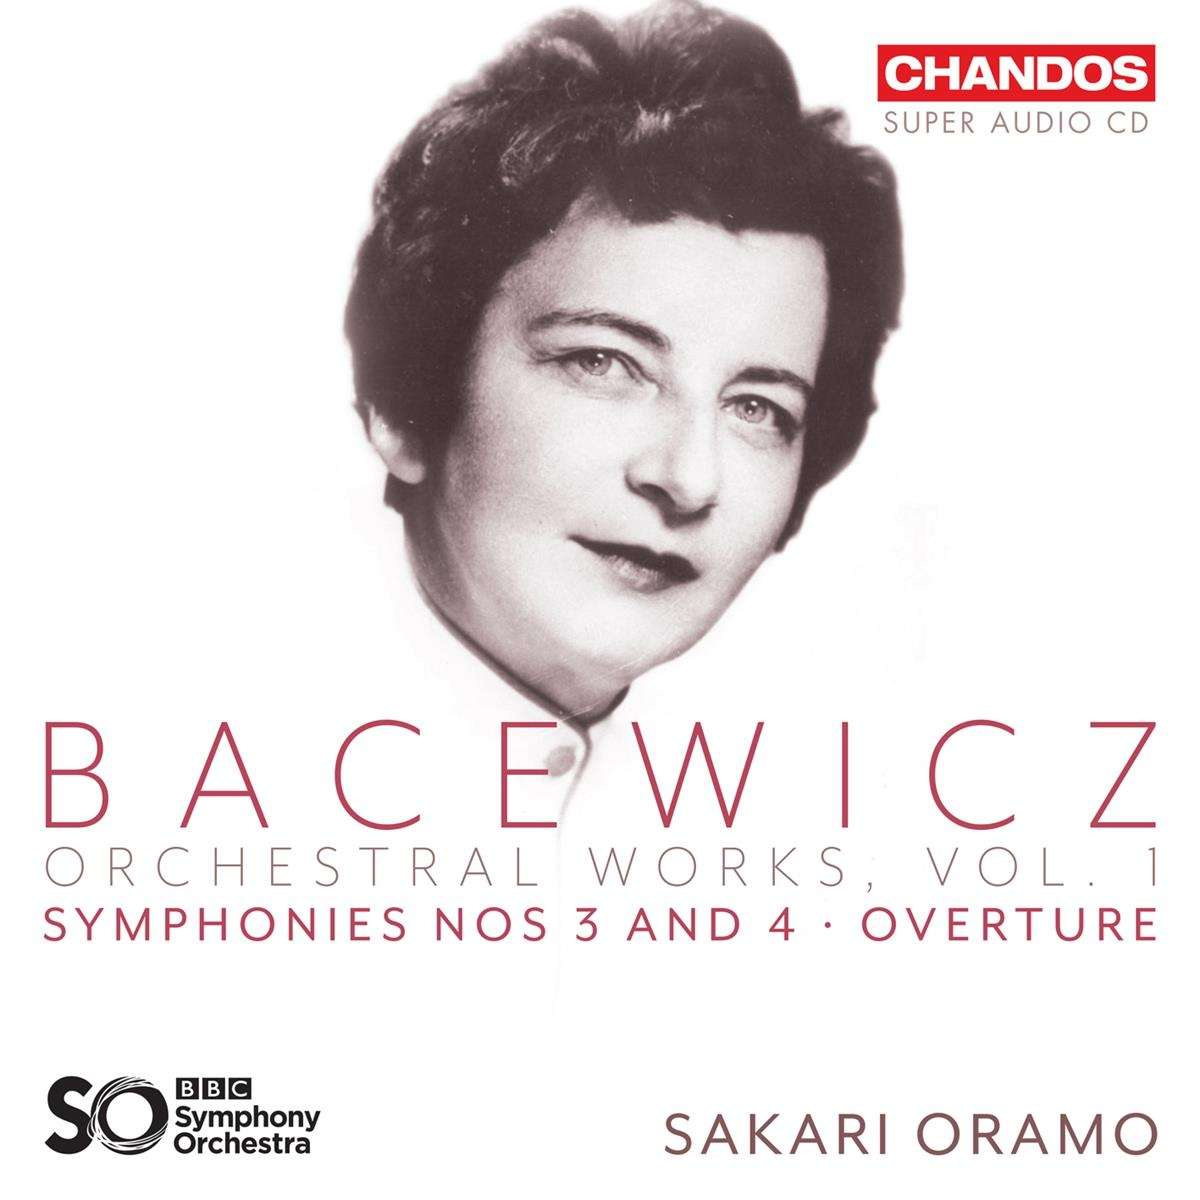 BACEWICZ - ORCHESTRAL WORKS, VOLUME 1